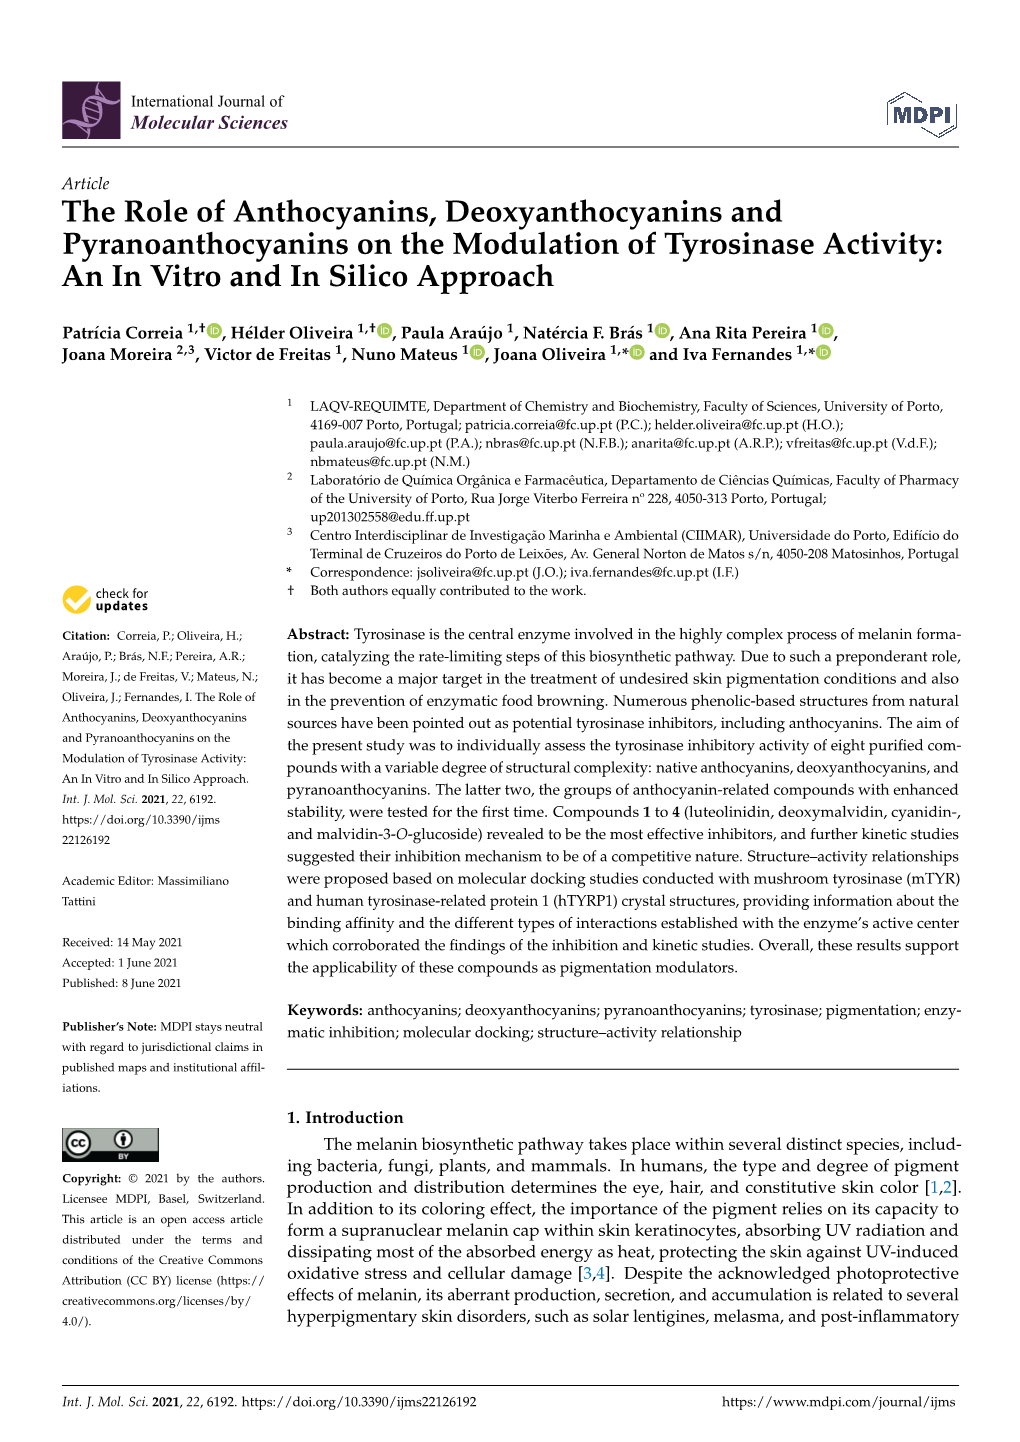 The Role of Anthocyanins, Deoxyanthocyanins and Pyranoanthocyanins on the Modulation of Tyrosinase Activity: an in Vitro and in Silico Approach